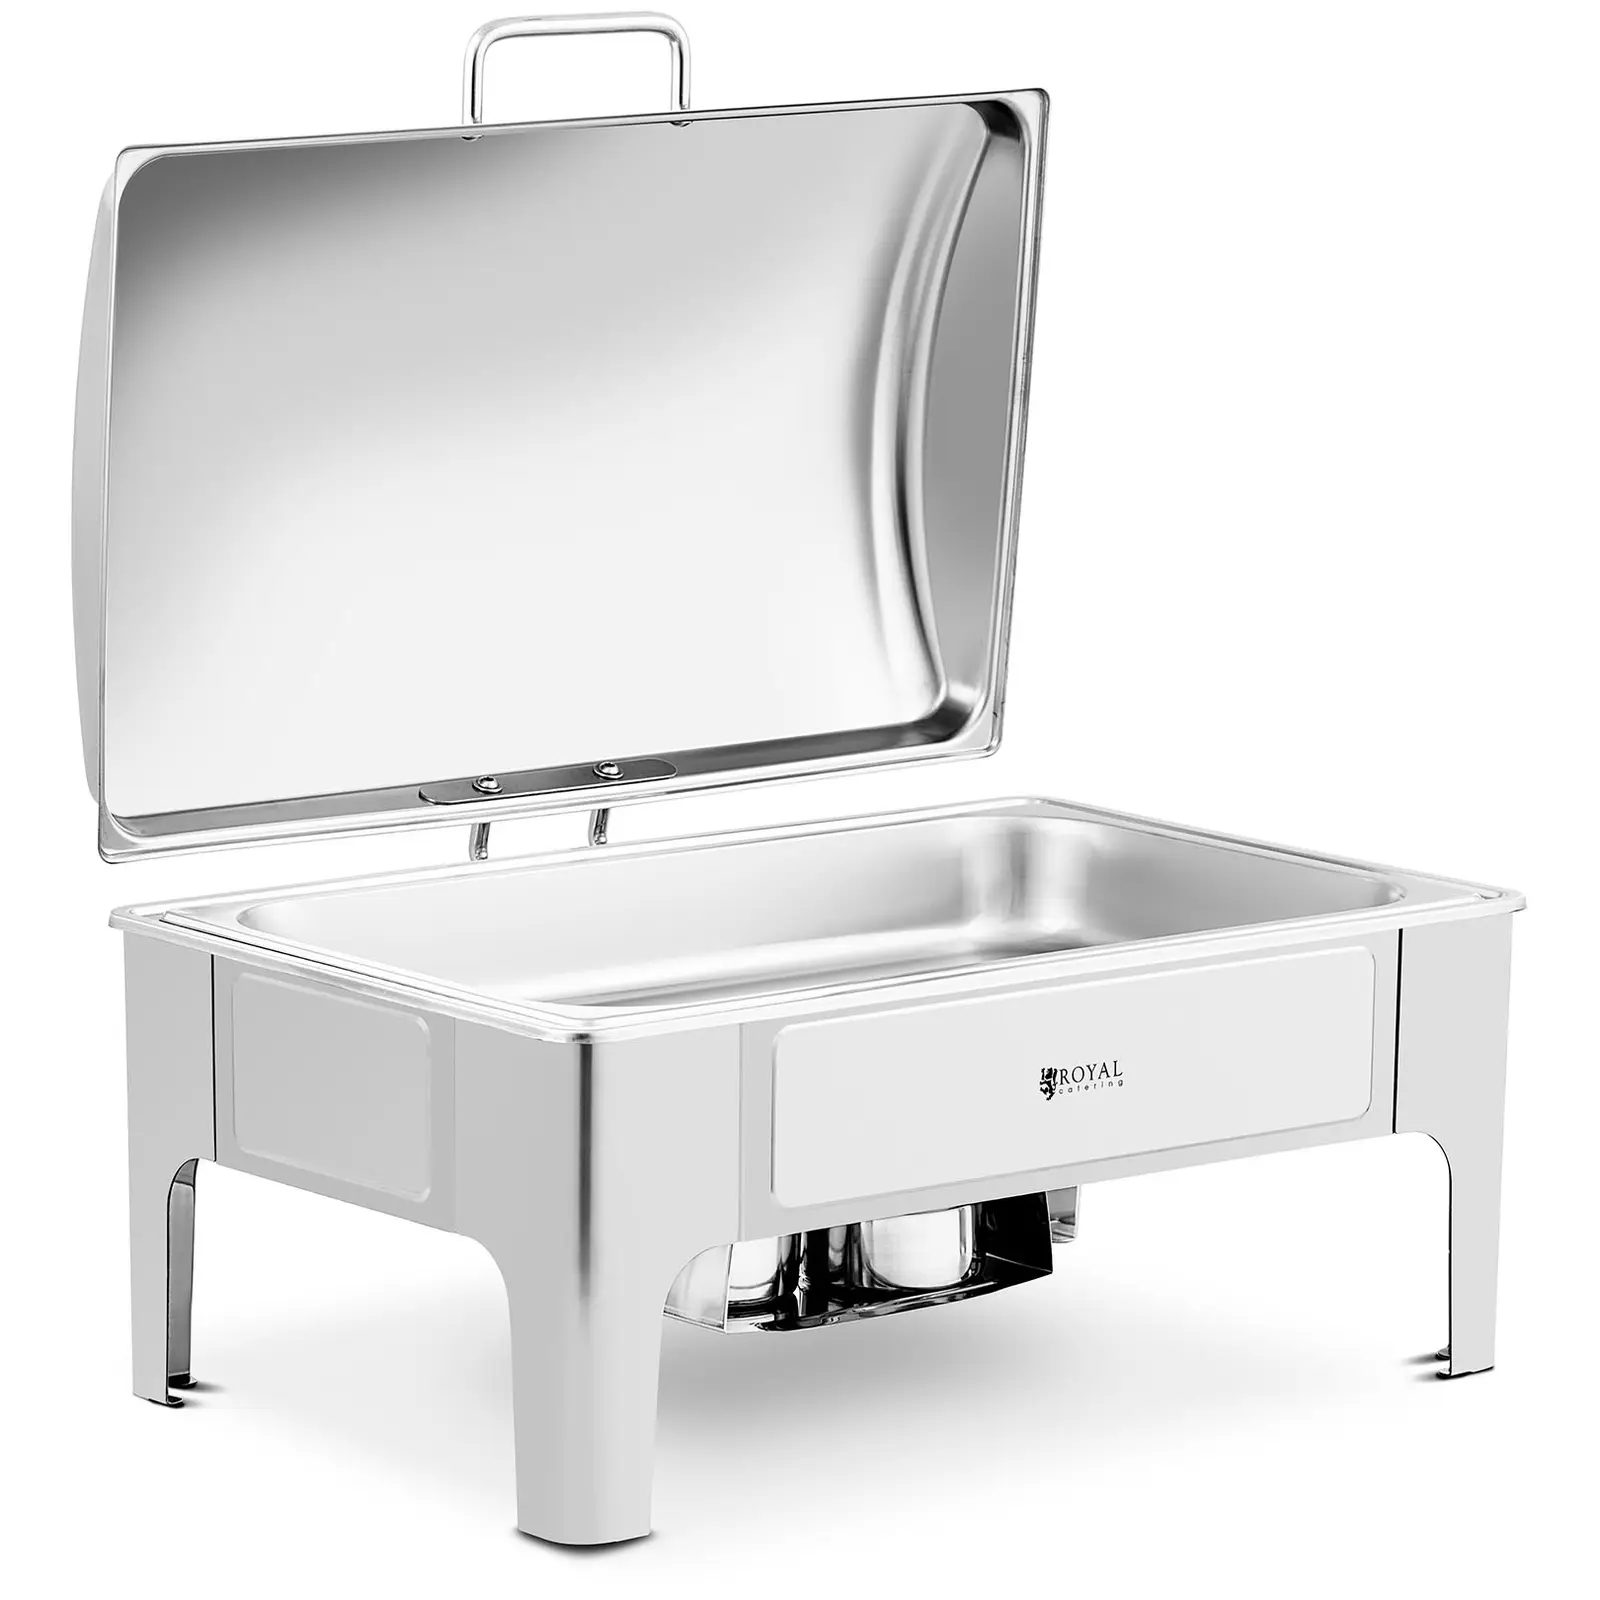 Chafing Dish - GN 1/1 - Royal Catering - 8,5 L - 2 contenedores de combustible - semicilíndrico